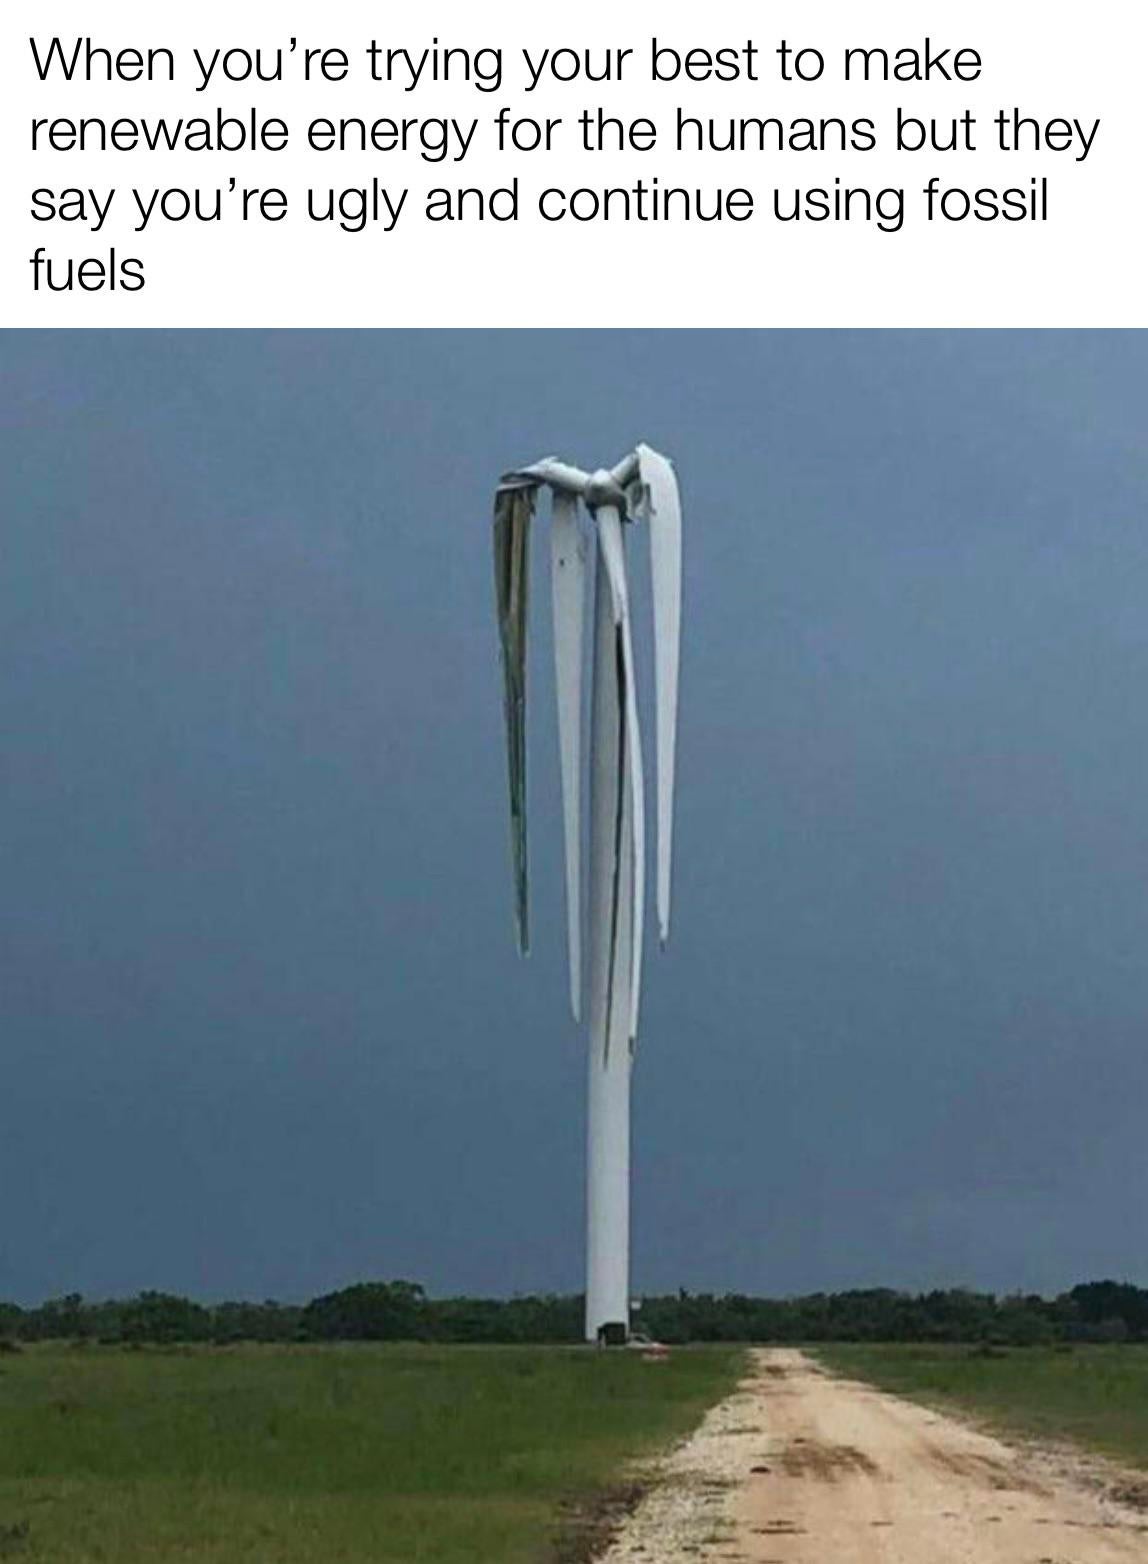 dank memes - wind turbine destroyed by tornado - When you're trying your best to make renewable energy for the humans but they say you're ugly and continue using fossil fuels